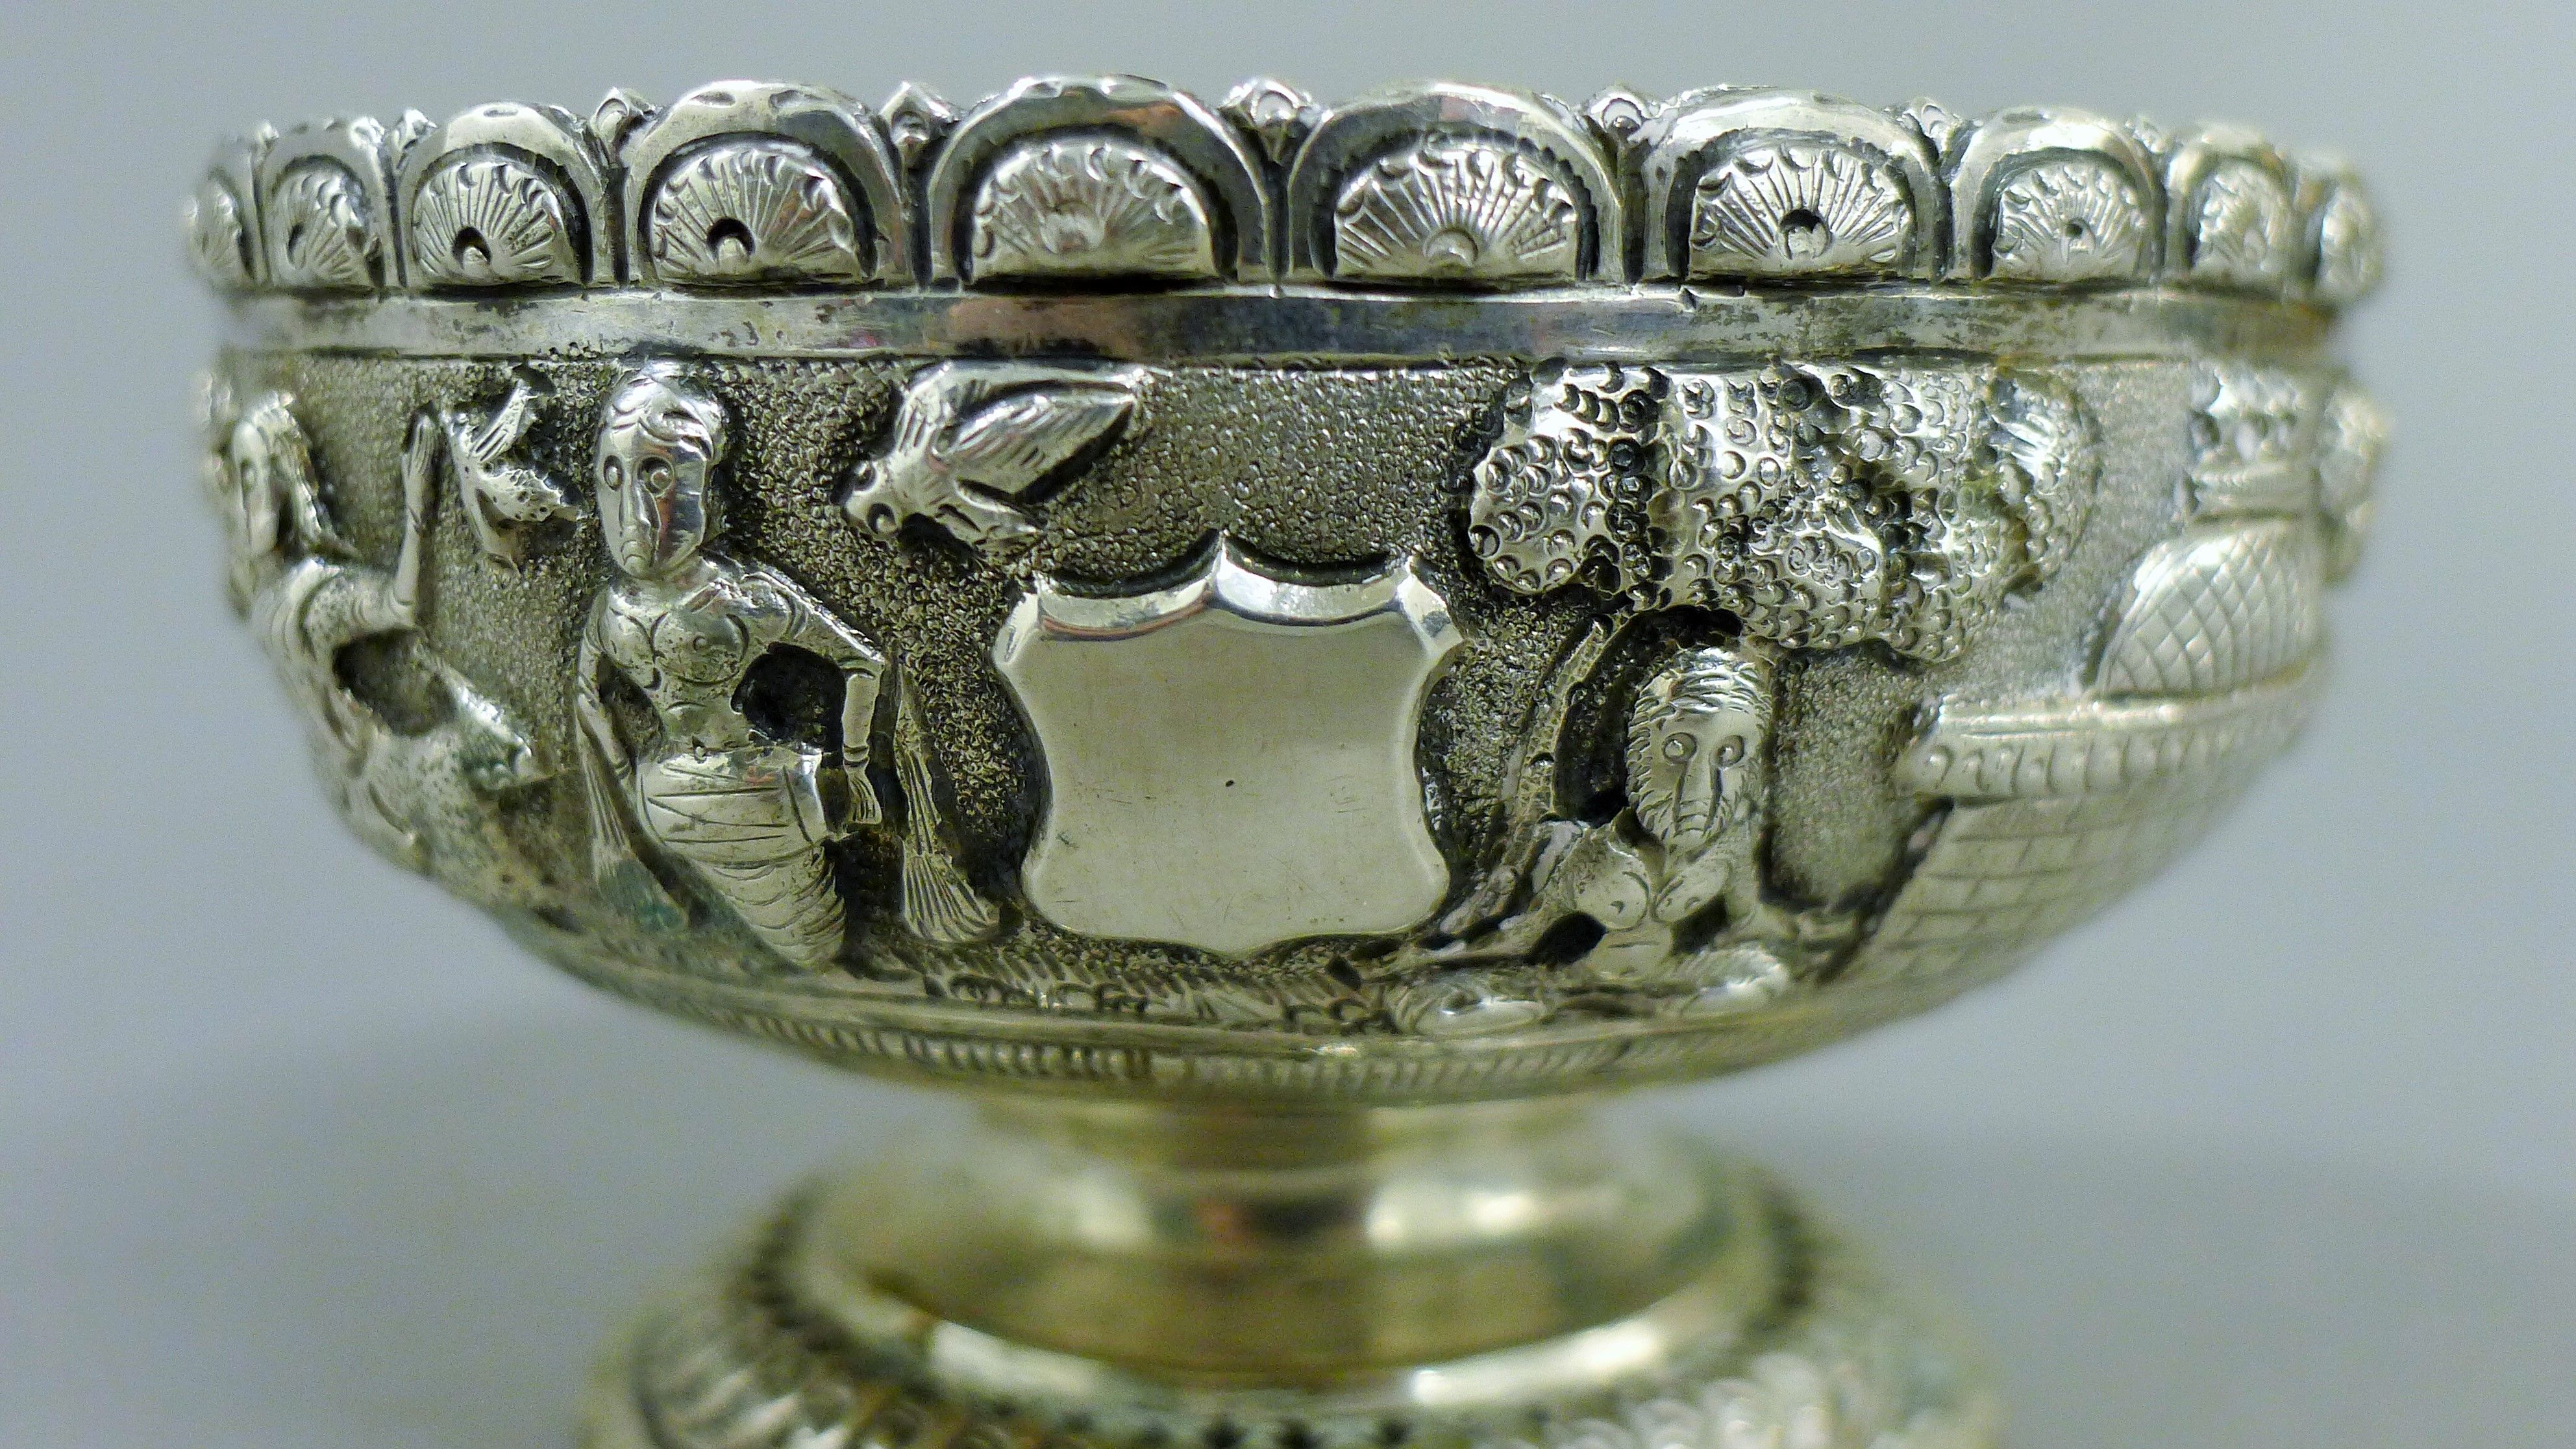 An Indian silver bowl with repousse decoration of rural scenery. 10 cm diameter. 85.9 grammes. - Image 3 of 5